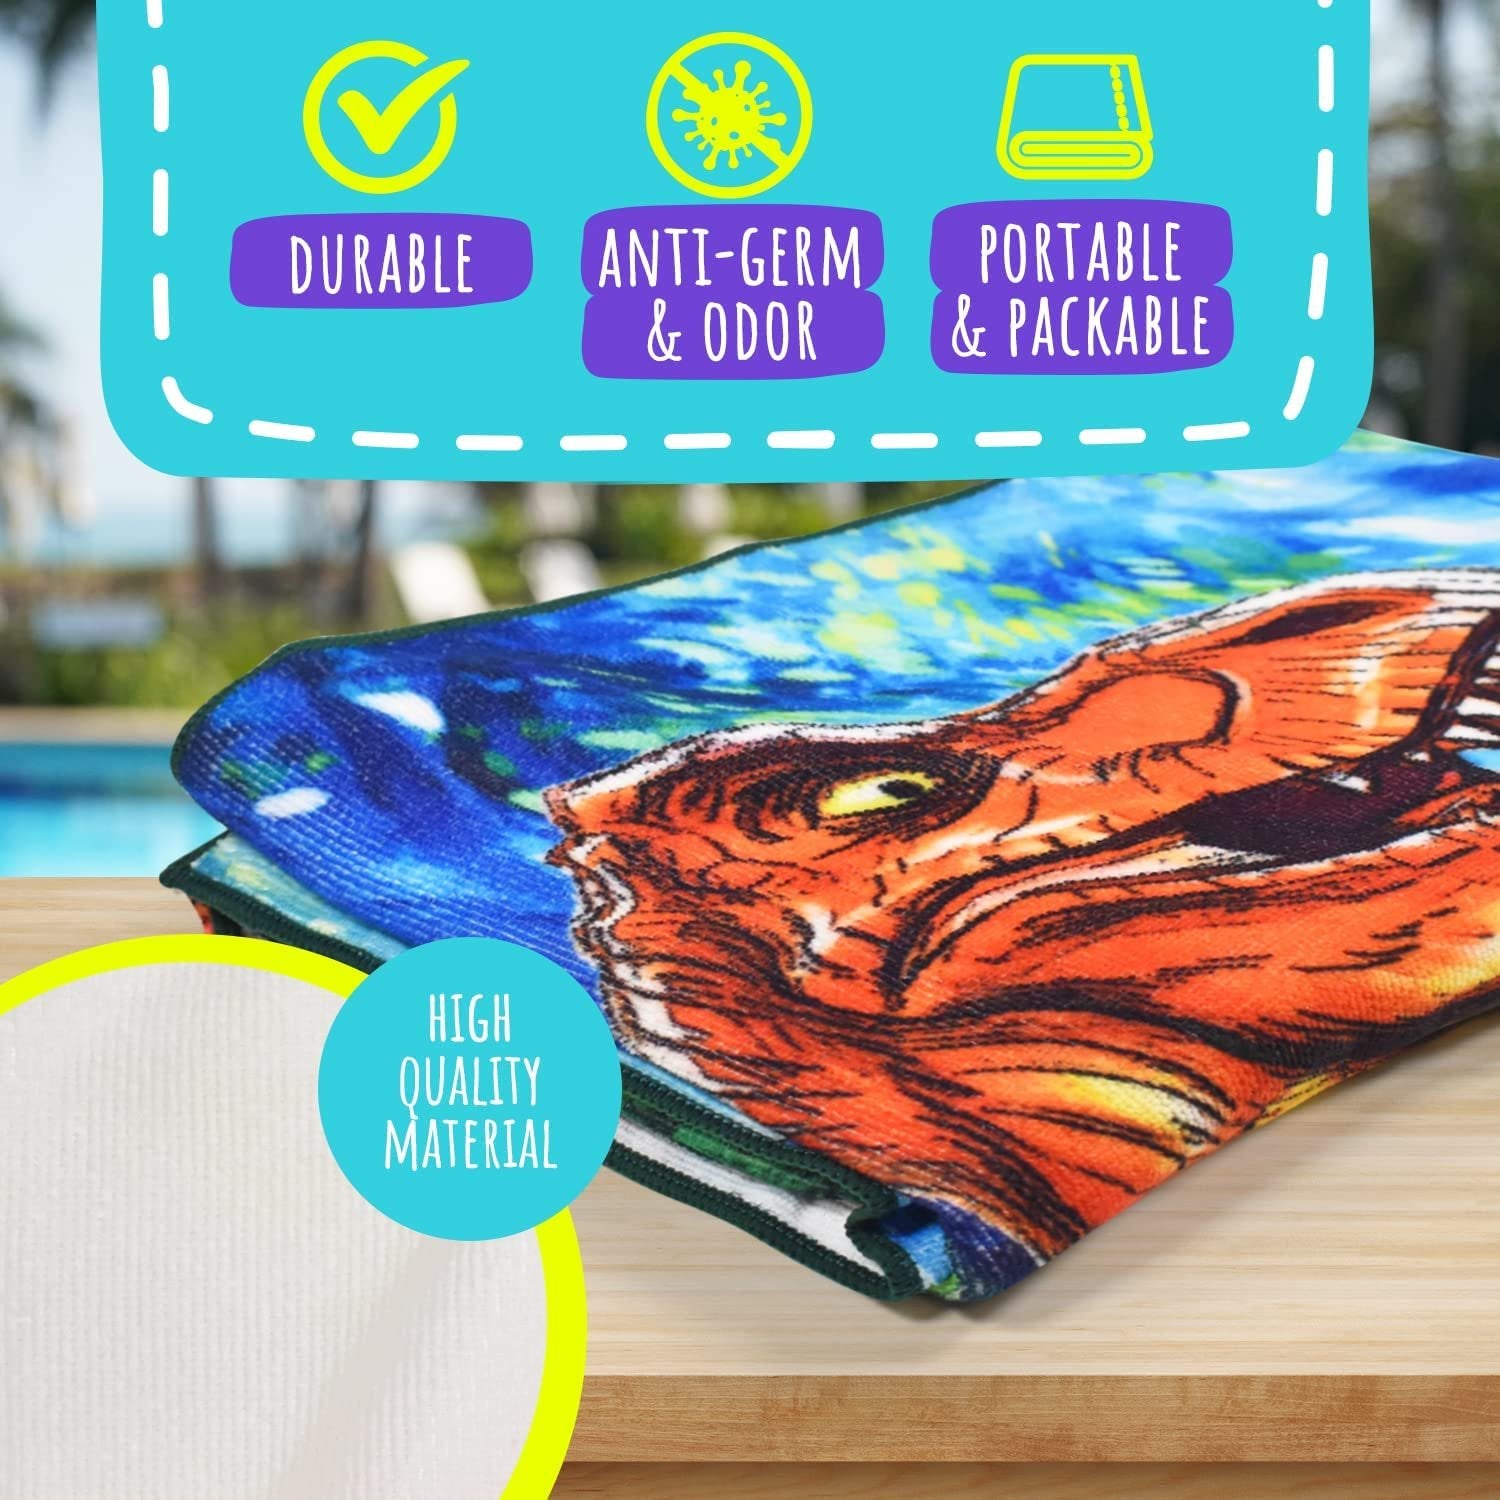 Beach Towel - Microfiber Beach Towels for Kids, Great for Beach, Bath, Swimming, Sports, Camping, Quick Fast Dry Sand Proof Super Soft Breathable and Lightweight Beach Towel (Dinosaur, Towel)